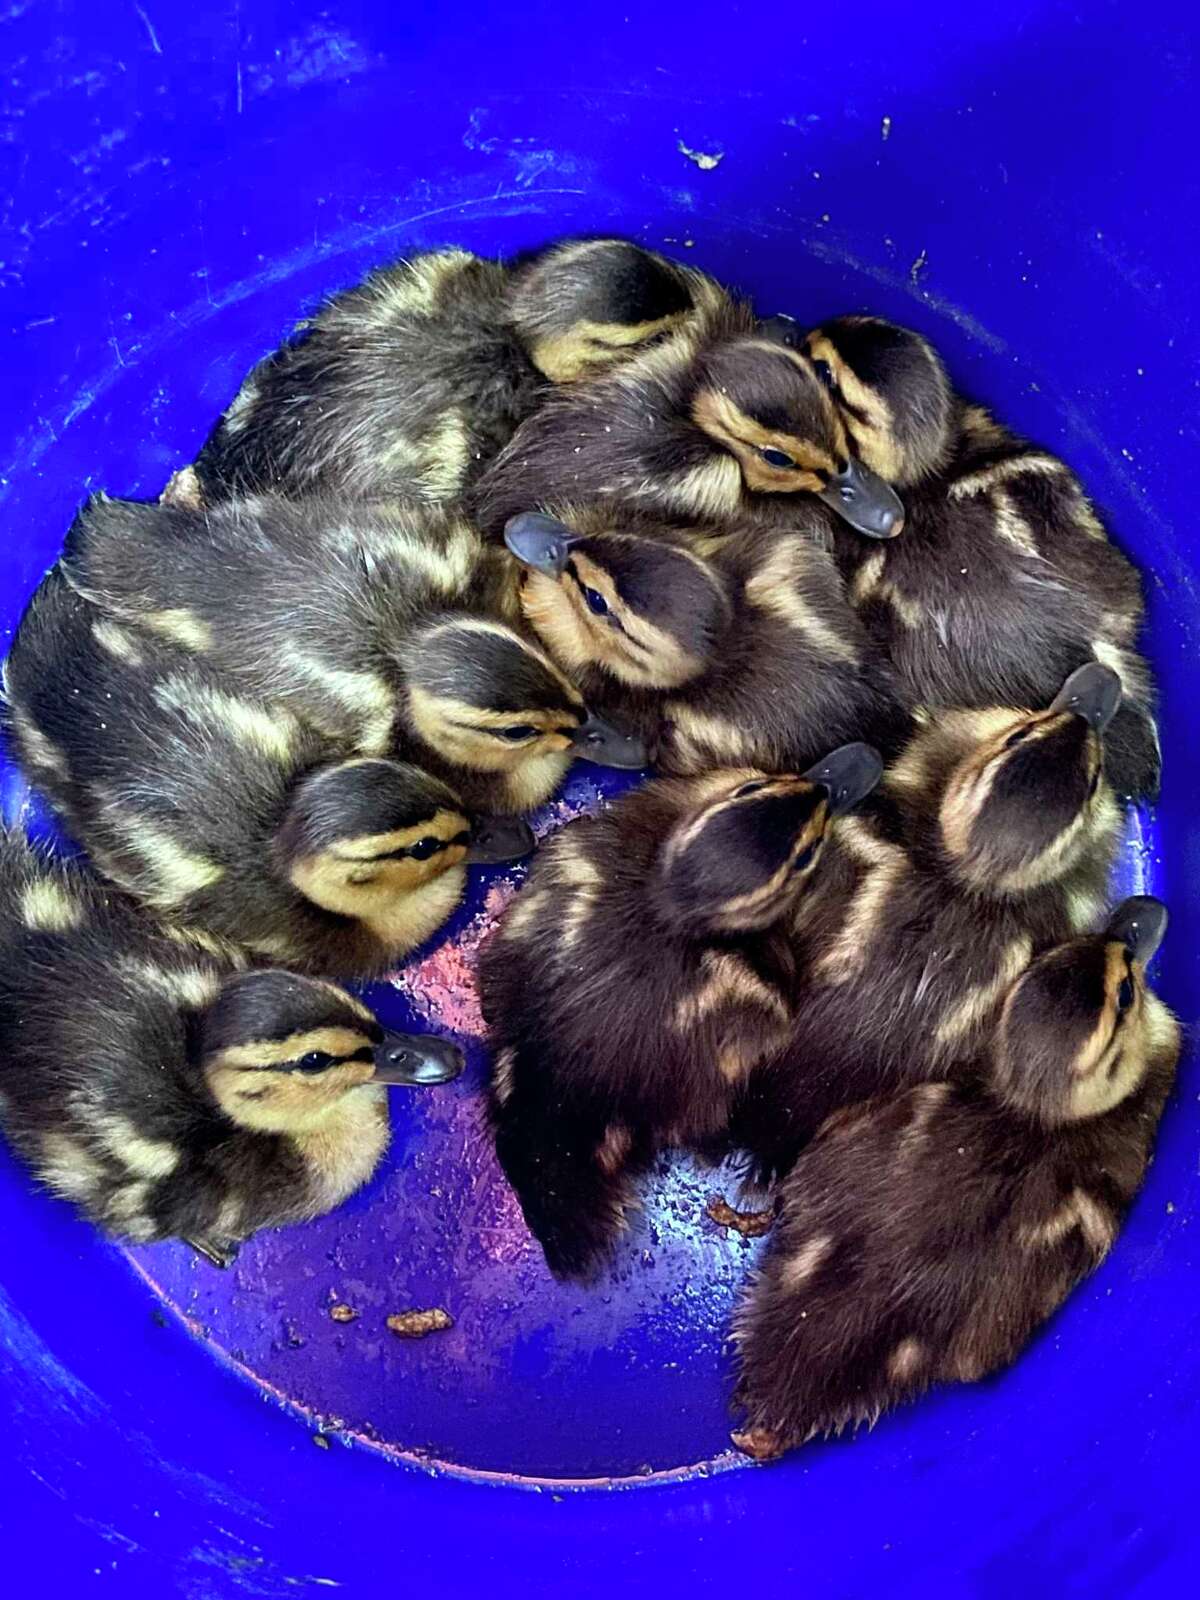 Jennifer Bradshaw, a nature educator at Woodcock Nature Center in Wilton, and Kris Zulkeski returned to the Miller-Driscoll School courtyard for the fourth year in a row to move a flock of newly-hatched ducklings to a more inhabitable environment.